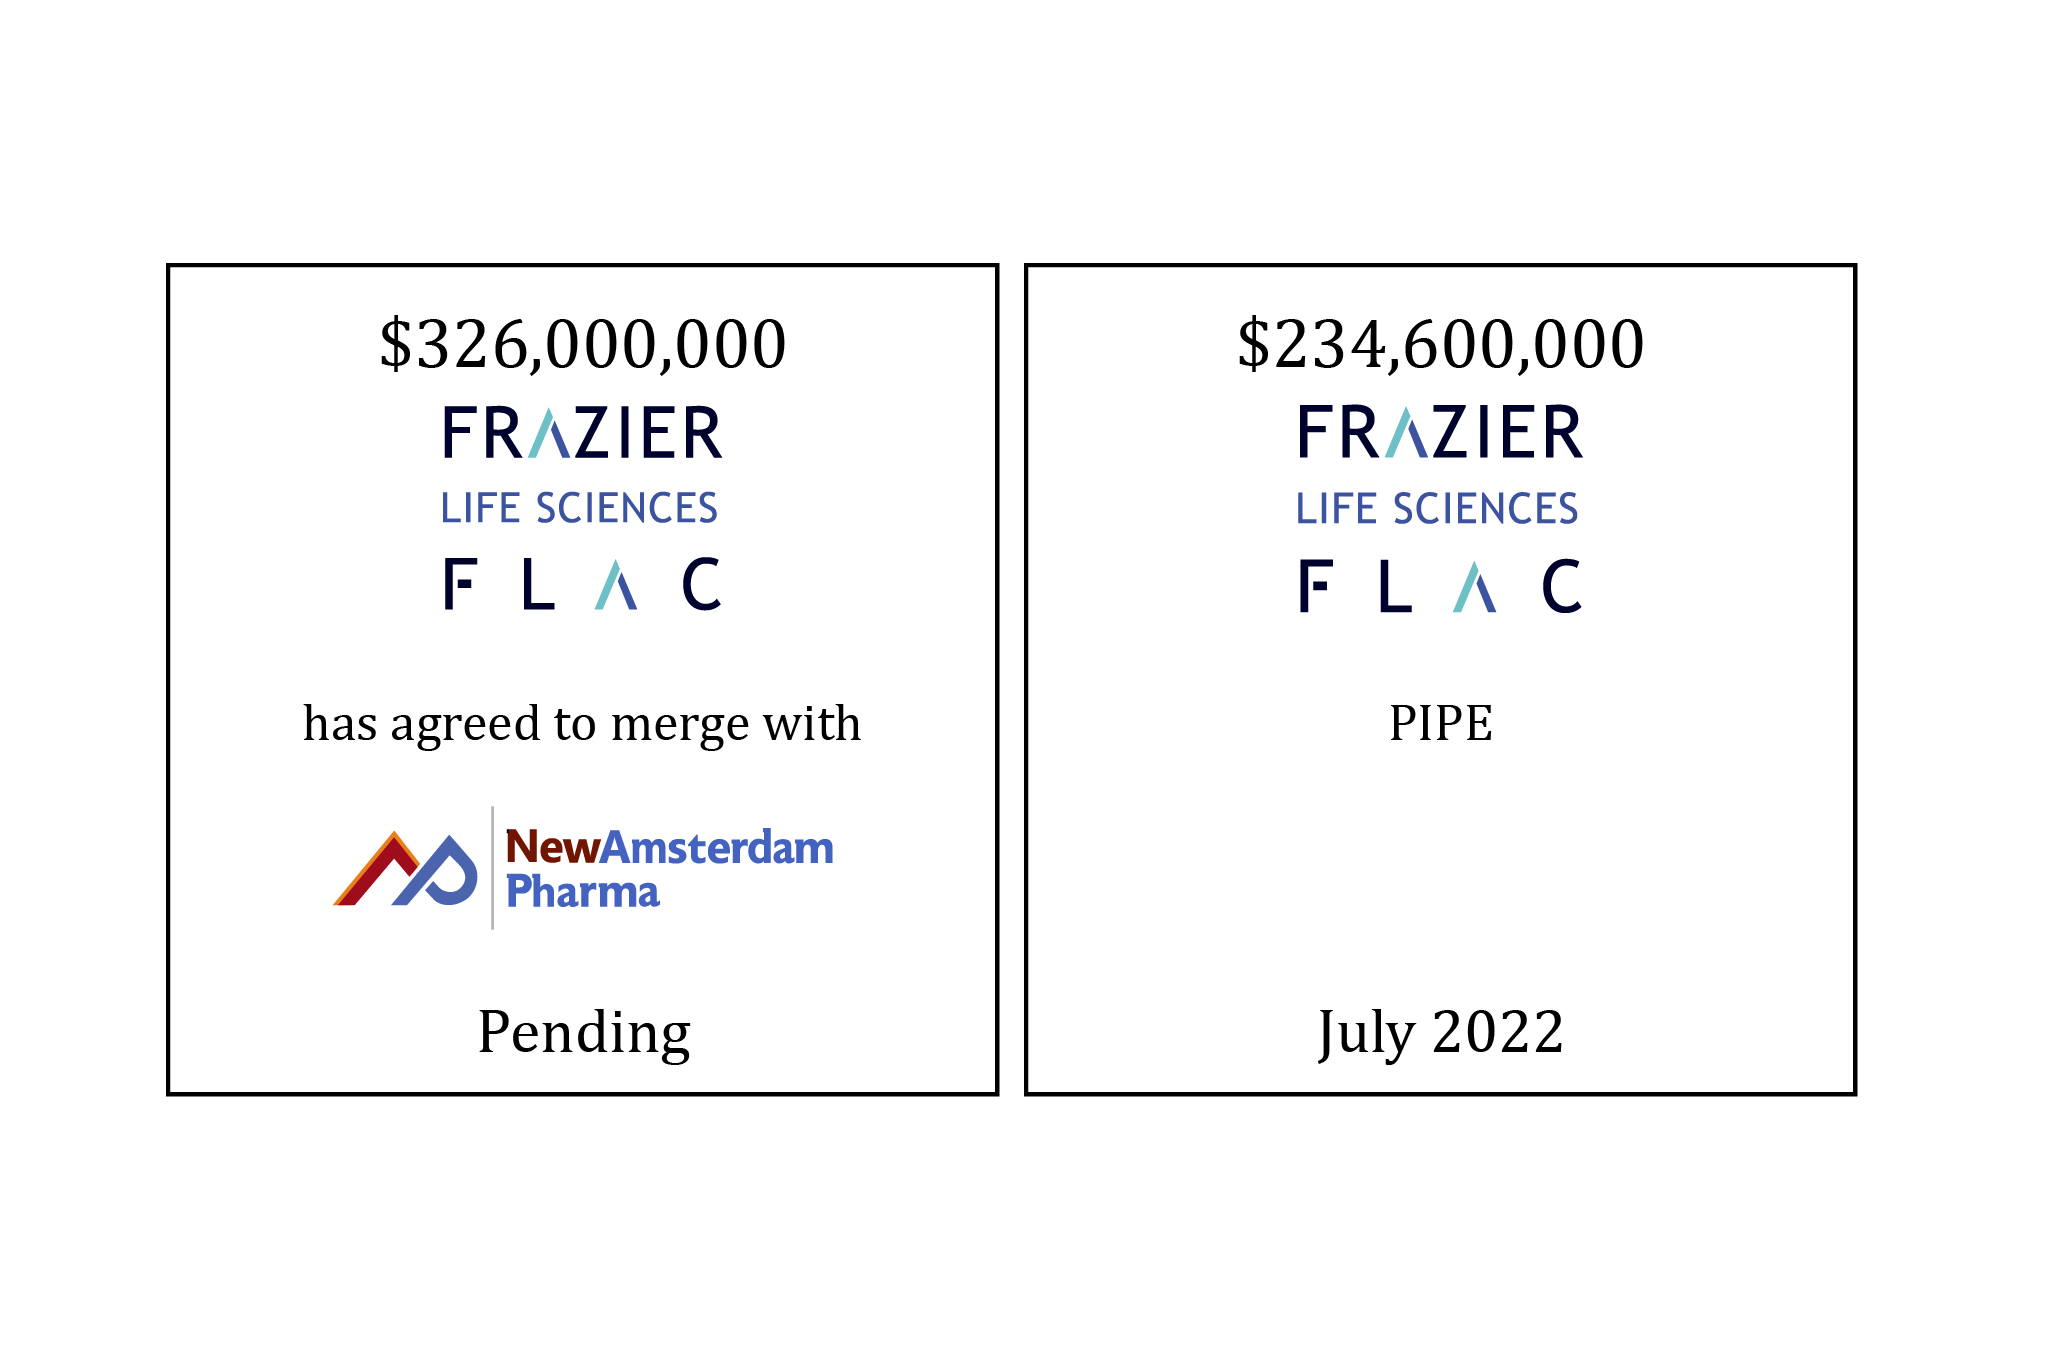 tombstone 1: $326,000,000 | Frazier Lifesciences Acquisition Corporation (logo) has agreed to merge with NewAmsterdam Pharma (logo) | Pending; tombstone 2: $234,600,000 | Frazier Lifesciences Acquisition Corporation (logo) PIPE | July 2022